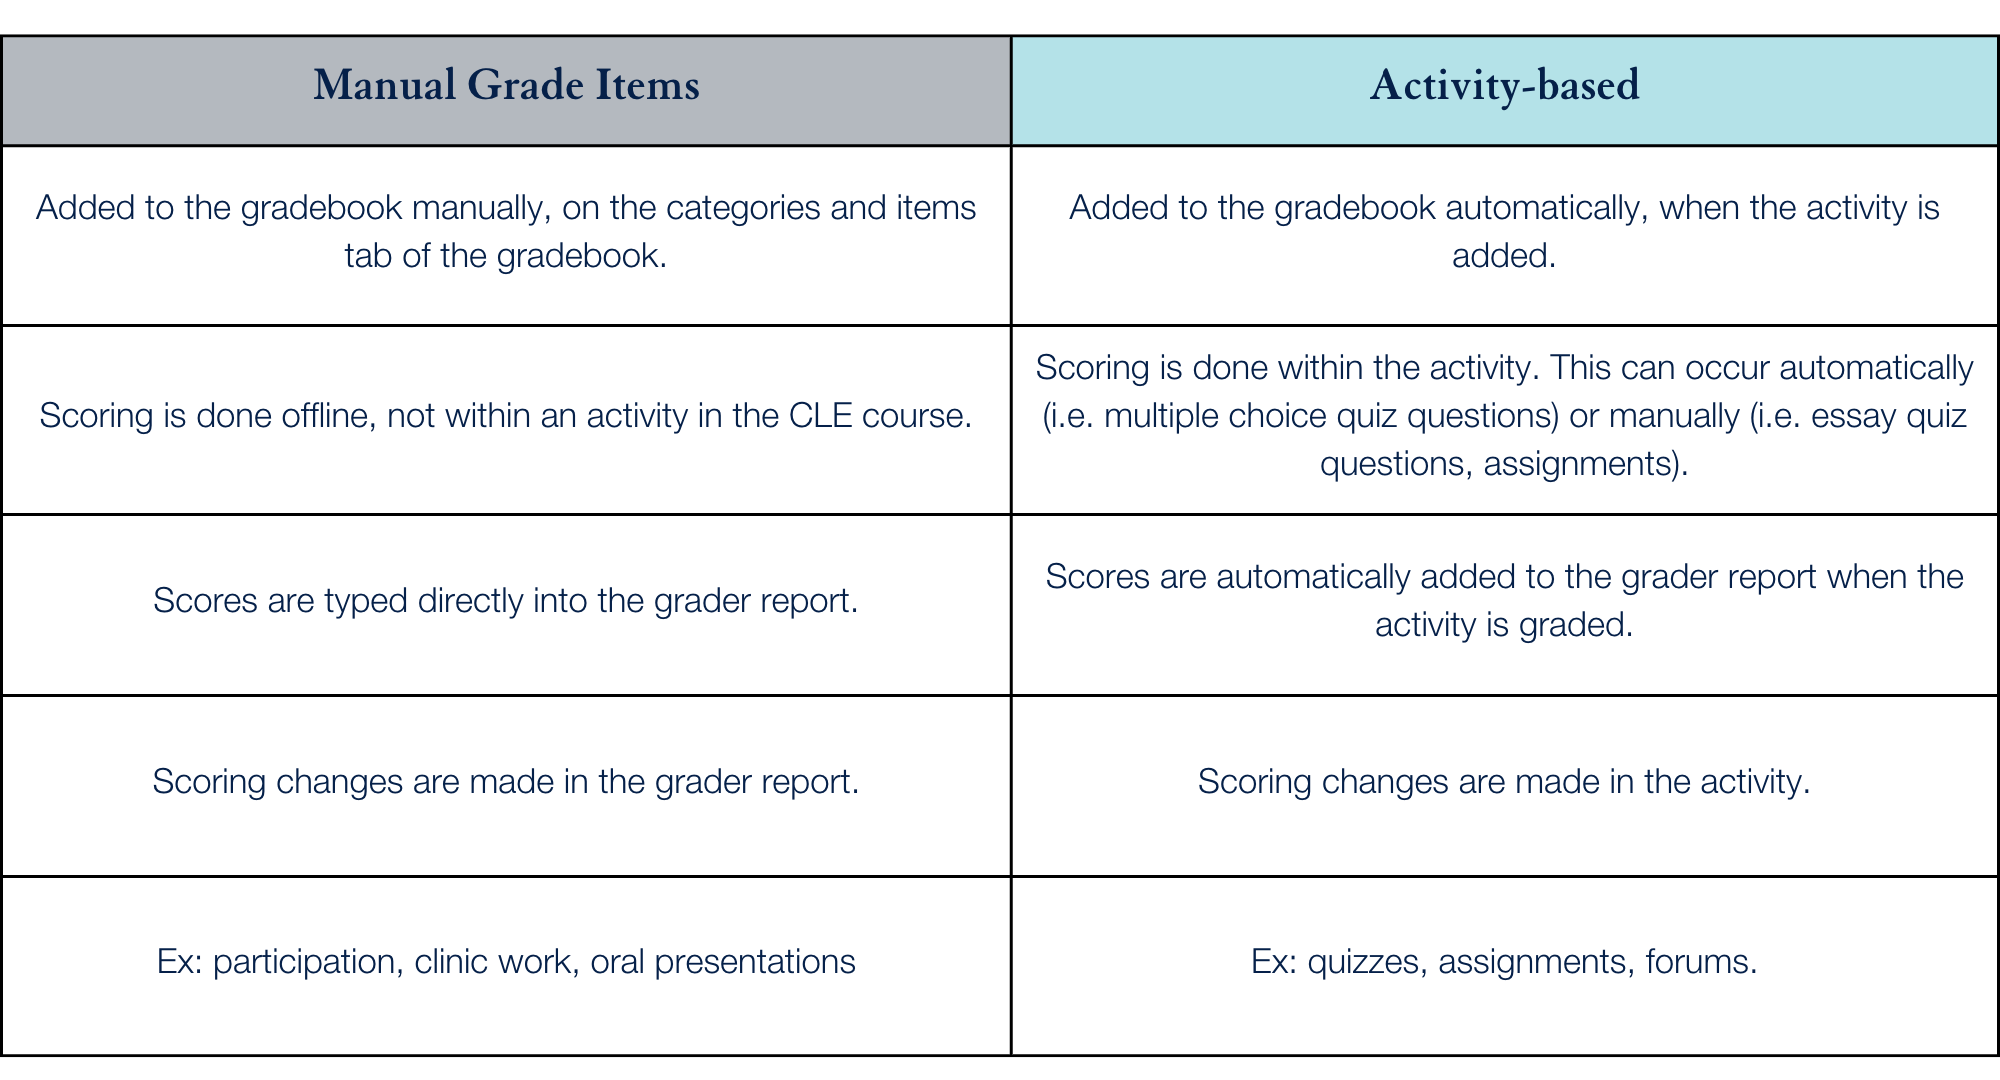 An image of a table showing the difference between manual grading versus activity based garding.png